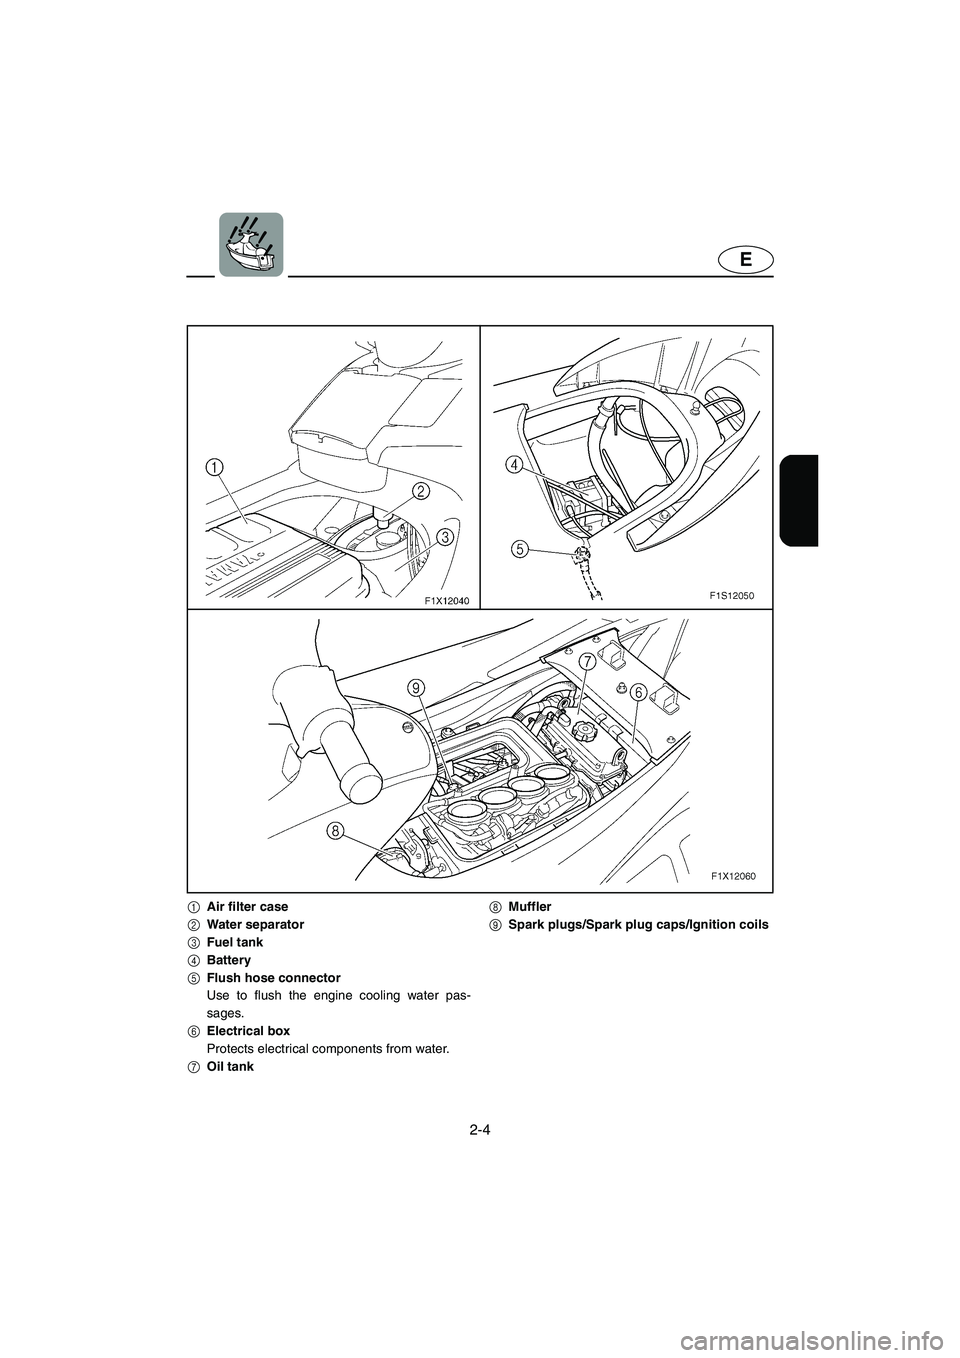 YAMAHA FX HO CRUISER 2006  Owners Manual 2-4
E
1Air filter case
2Water separator
3Fuel tank
4Battery
5Flush hose connector
Use to flush the engine cooling water pas-
sages.
6Electrical box
Protects electrical components from water.
7Oil tank